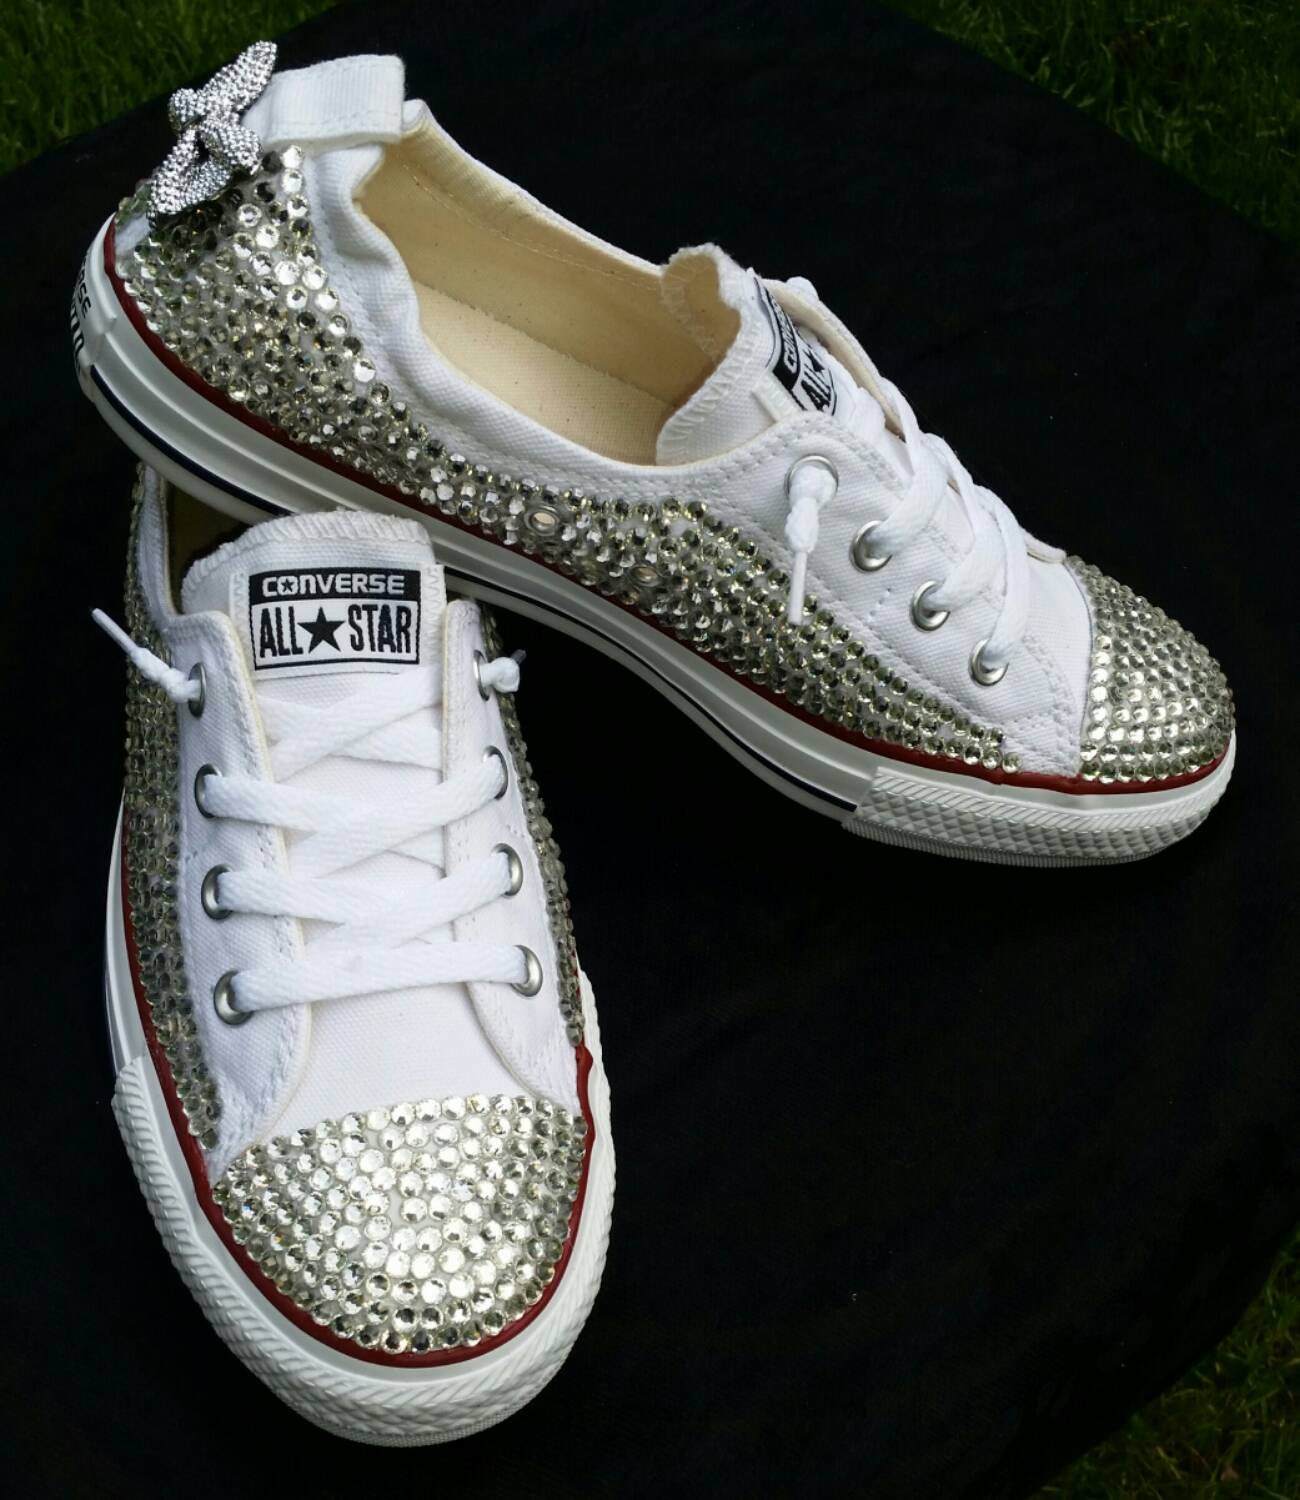 Full Bling Bridal Converse Wedding Converse by DivineUnlimited